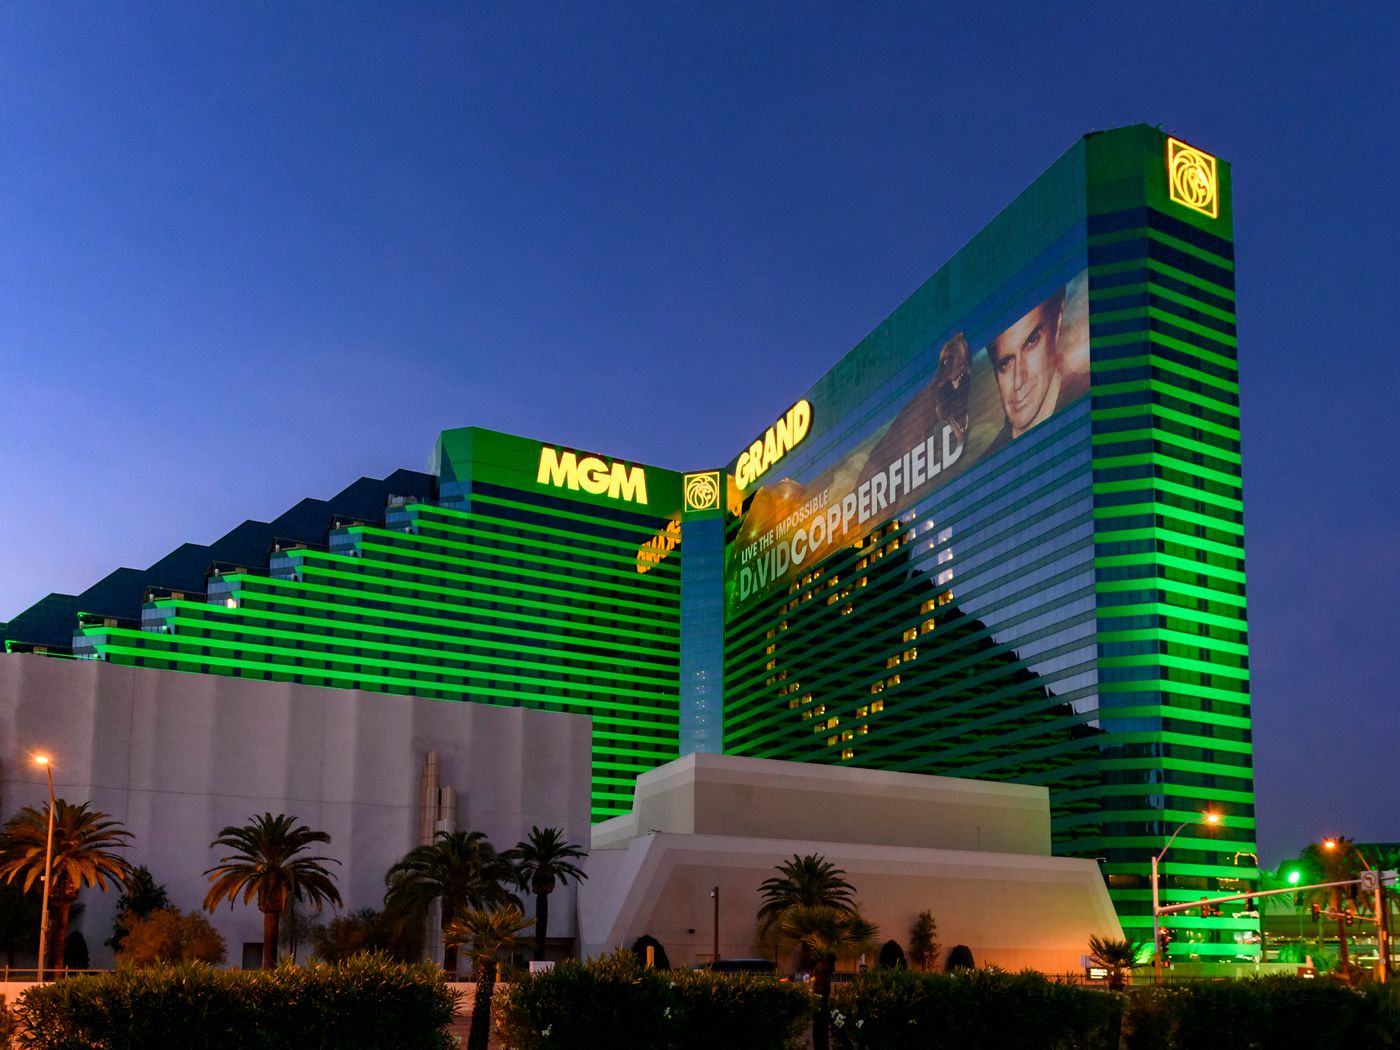 The Allure Of The MGM Grand Revealed